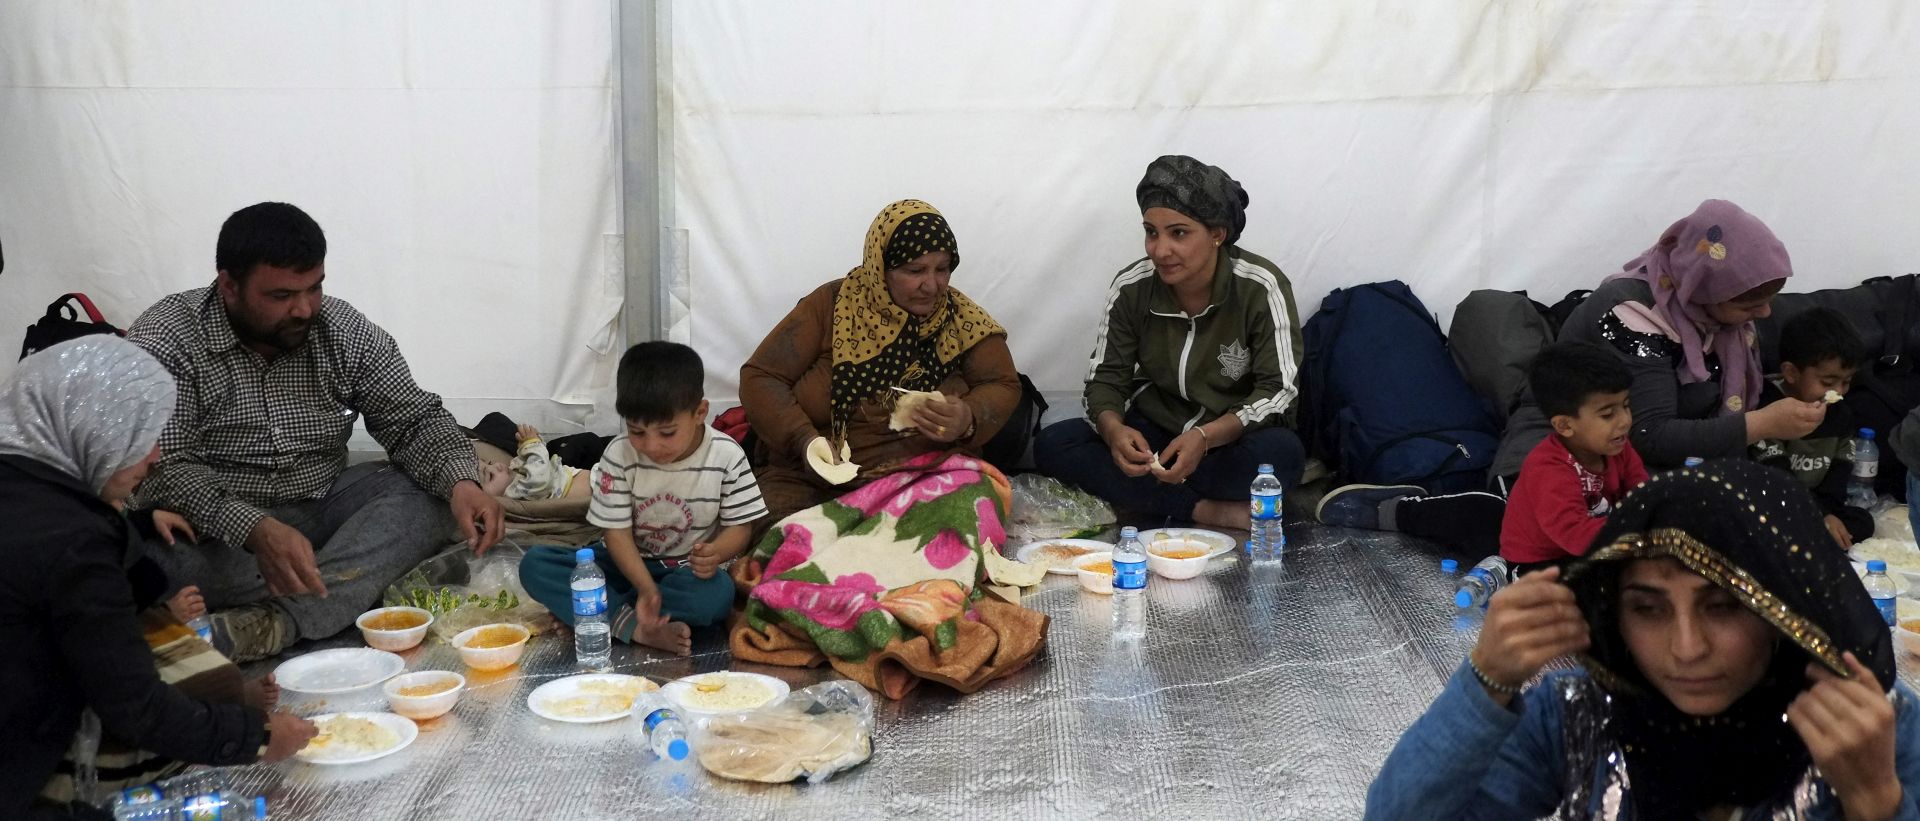 epa07938822 Syrian refugees eat after arriving at Bardarash refugee camp in South of Duhok, Kurdistan region, Iraq, 21 October 2019. According to camp officials, more than 1200 refugee arrived to the camp on 21 October after fleeing the Turkish military operation in Syria. Turkey has launched an offensive targeting Kurdish forces in north-eastern Syria on 09 October, days after the US withdrew troops from the area.  EPA/GAILAN HAJI